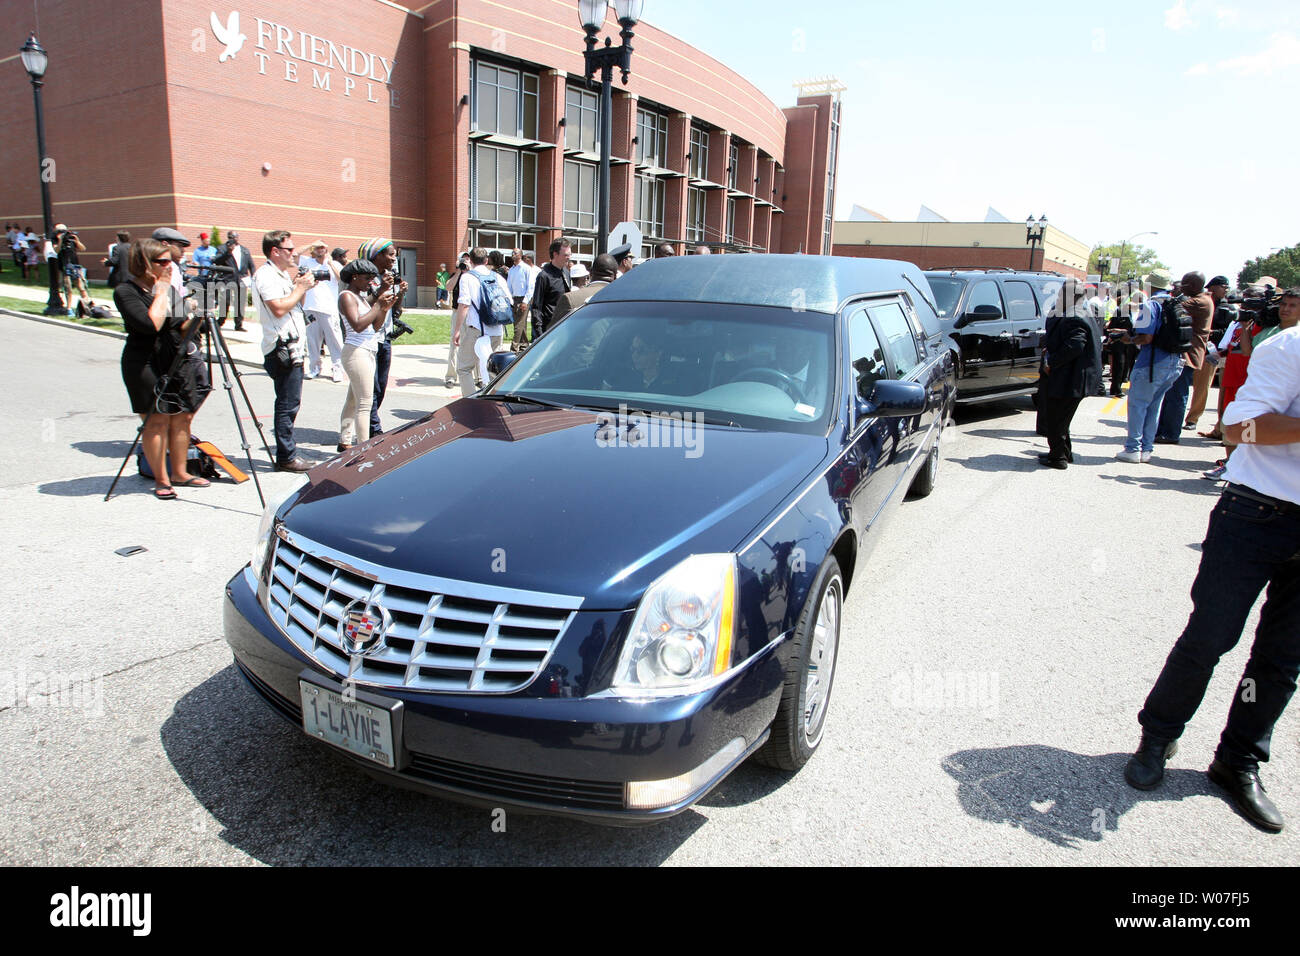 The hearse containing the remains of Michael Brown Jr. leaves the Friendly Temple Missionary Baptist Church at the completion of his funeral in St. Louis on August 25, 2014. Brown gained attention after was shot by a white Ferguson, Missouri police officer on August 9 and was unarmed. The shooting led to several nights of looting, arrests and heavy police presence.   UPI/Bill Greenblatt Stock Photo